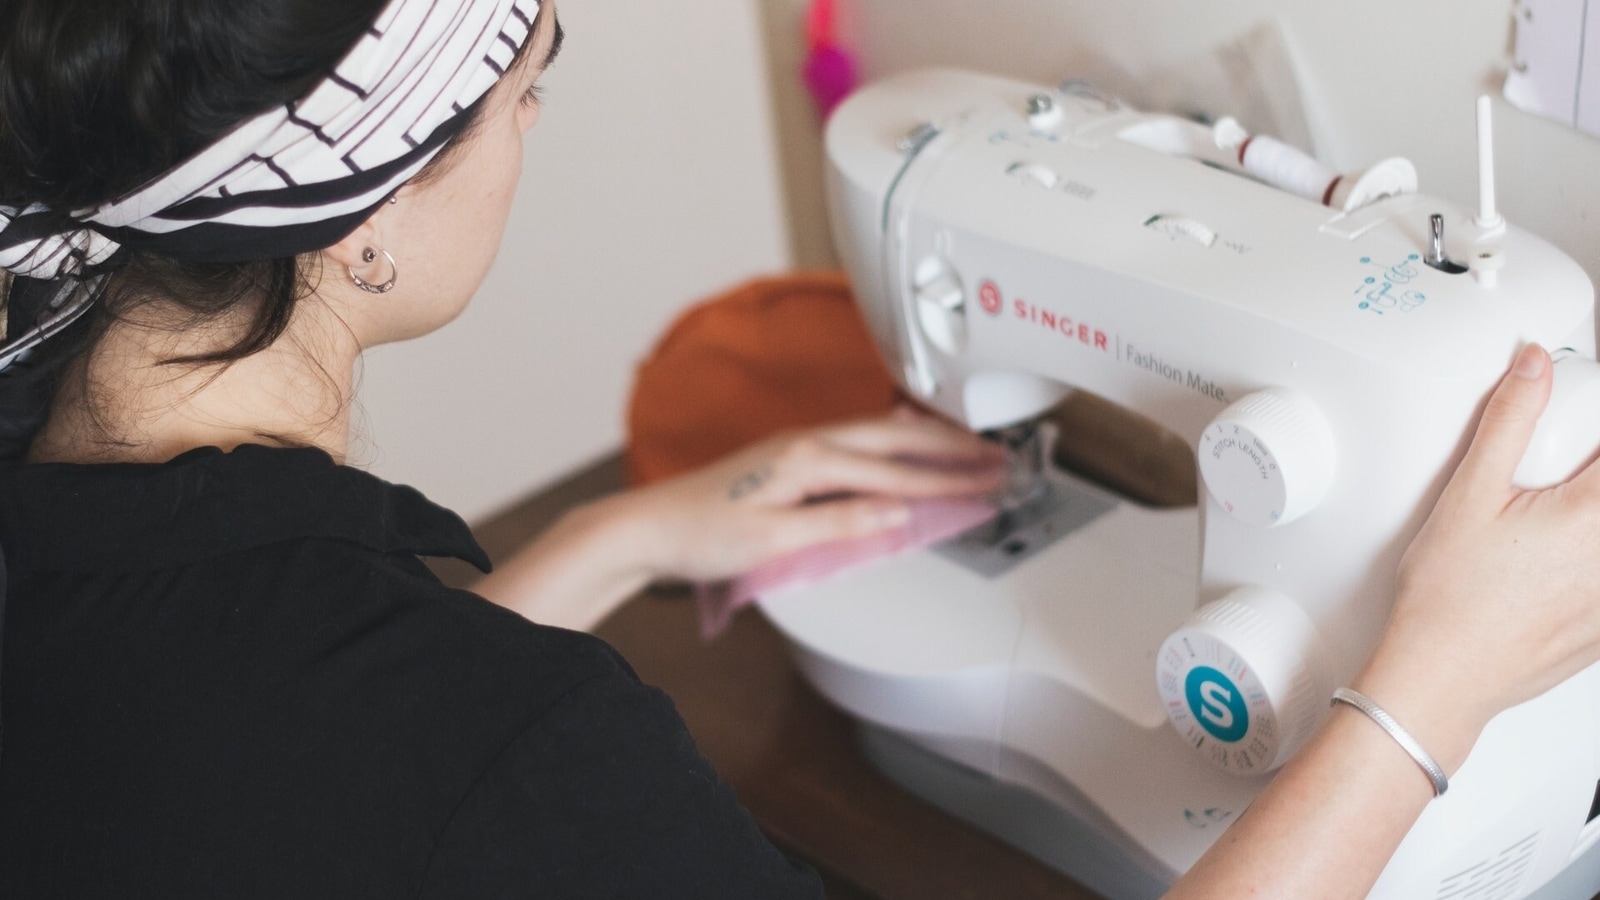 Sew Anywhere with this Portable Sewing Machine